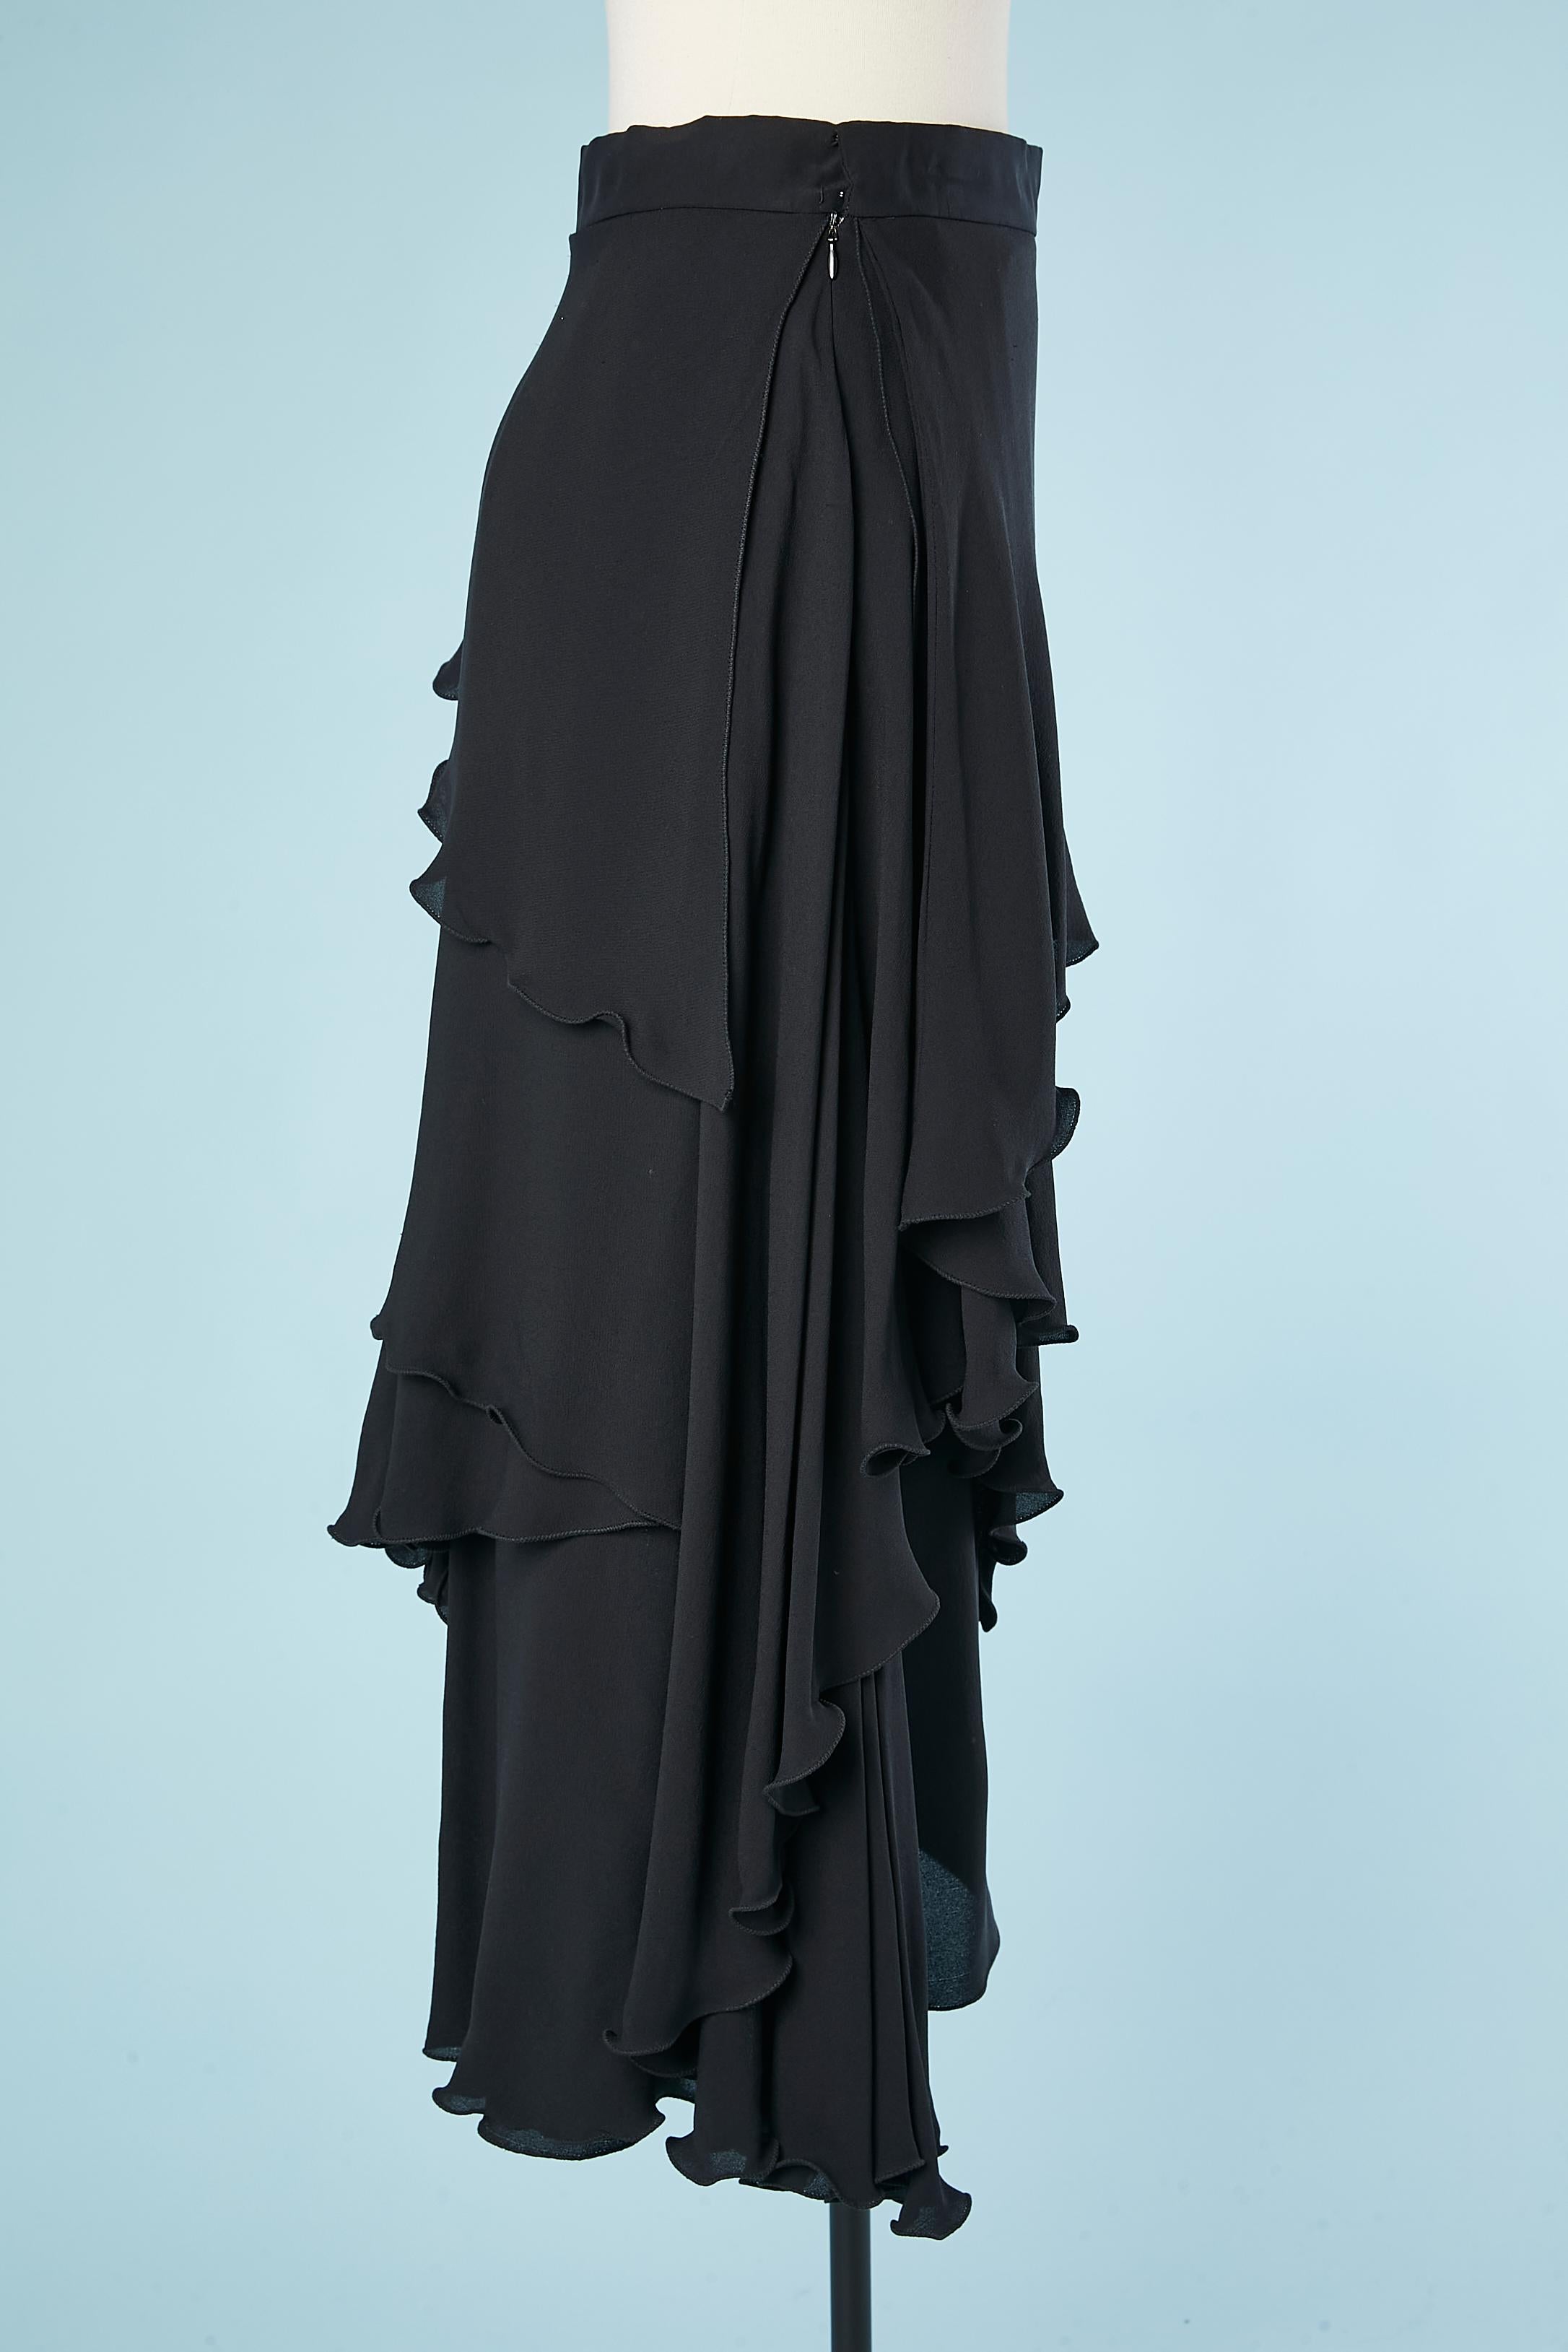 Black silk chiffon skirt with ruffles Gianni Versace Couture  For Sale 1